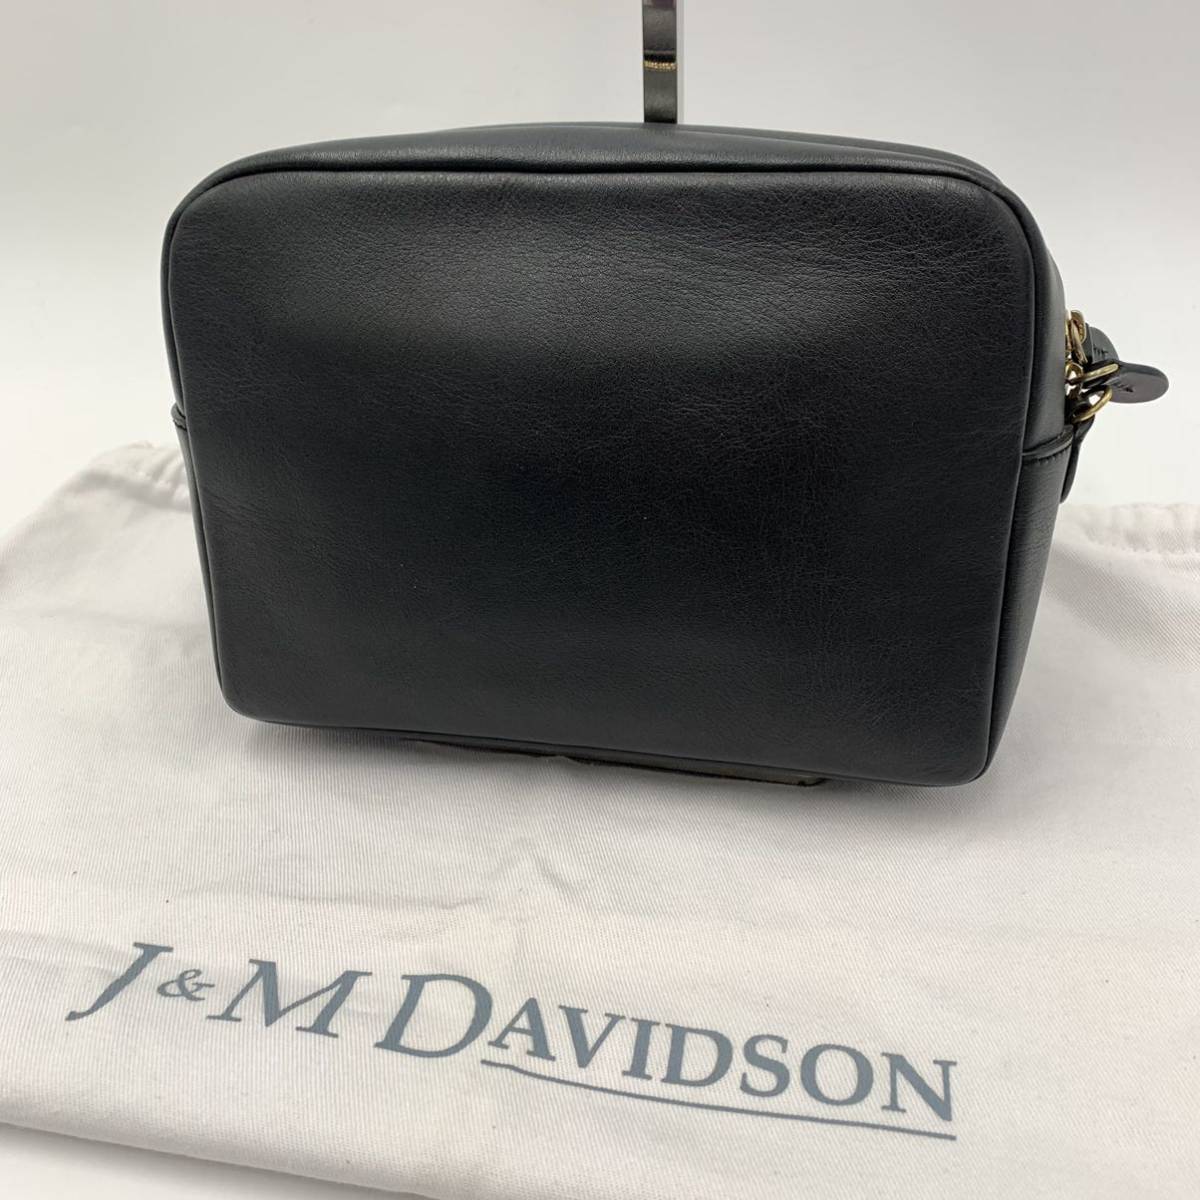 C* superior article /. height. one goods \' Spain made \' J&M Davidson J&M Davidson fine quality leather vanity bag make-up pouch clutch bag BLK high class woman bag 